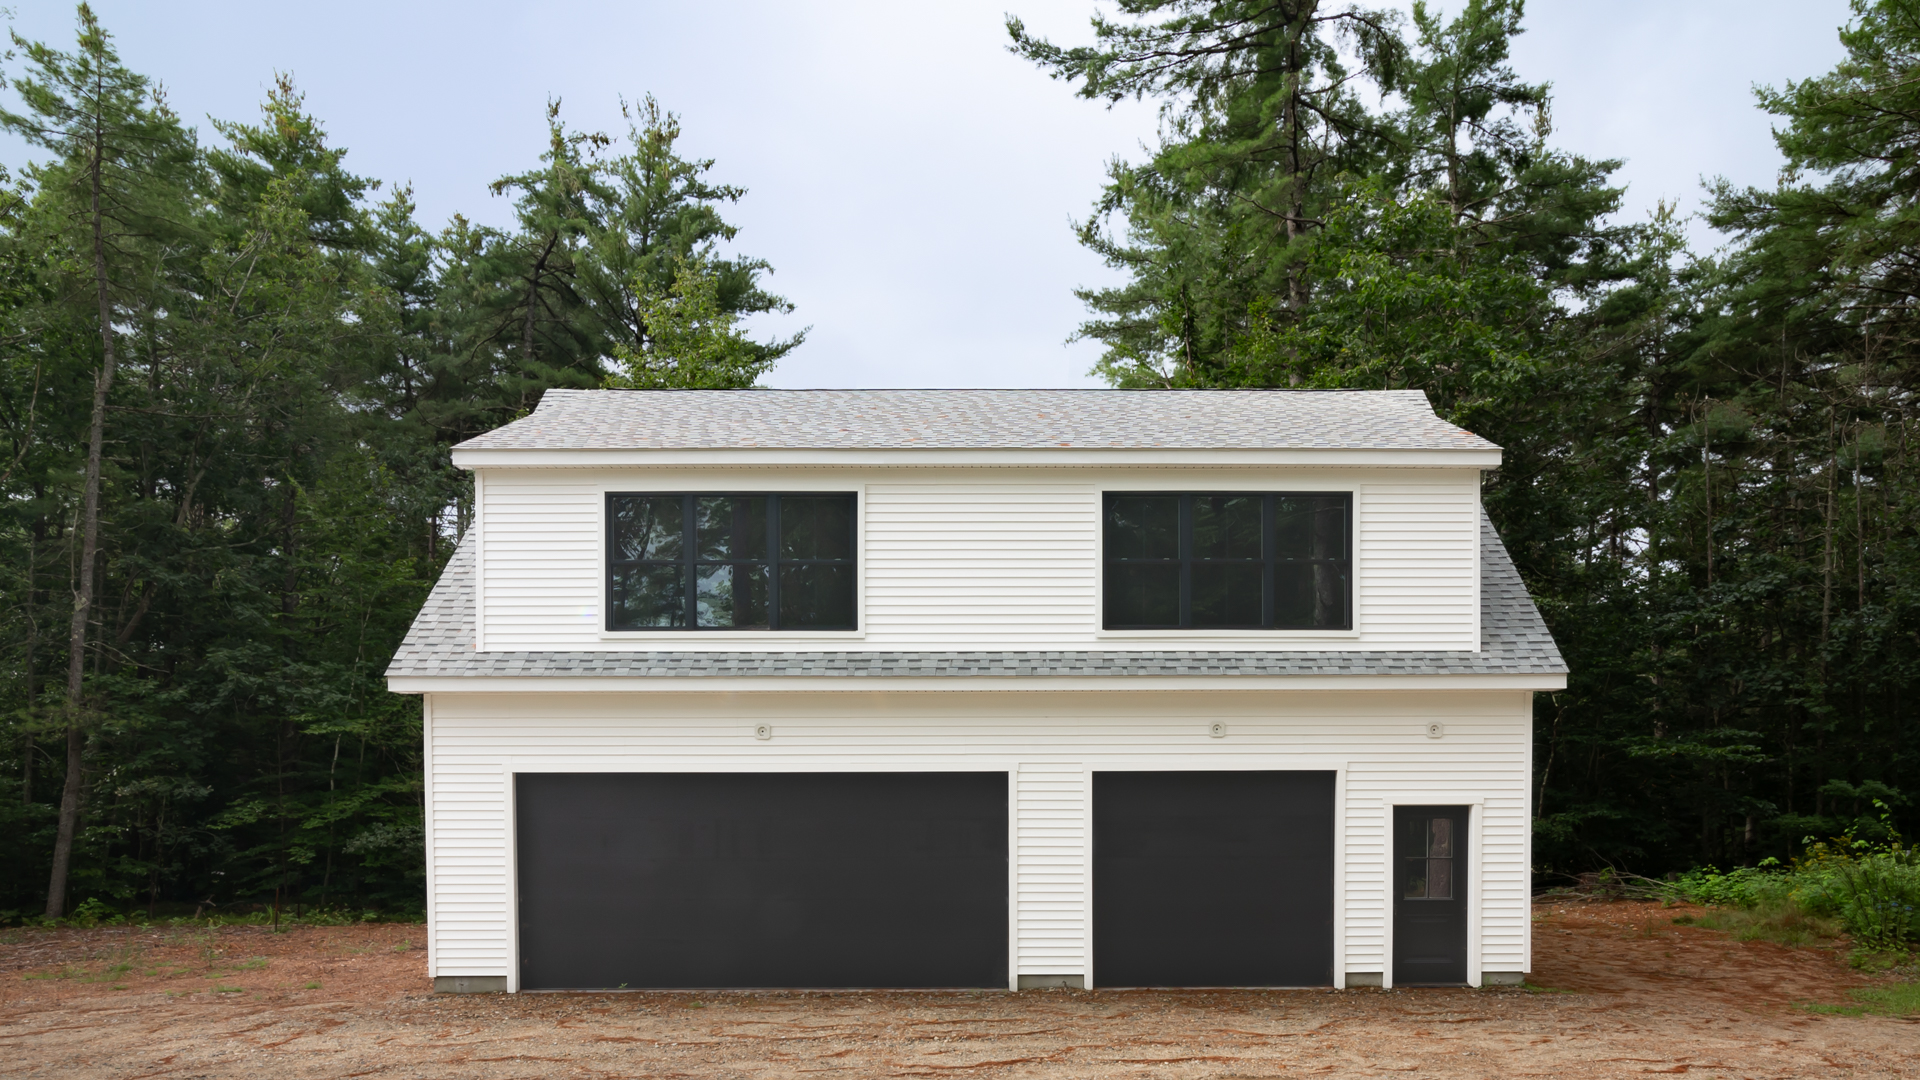 How Much Does A Detached Garage Cost?